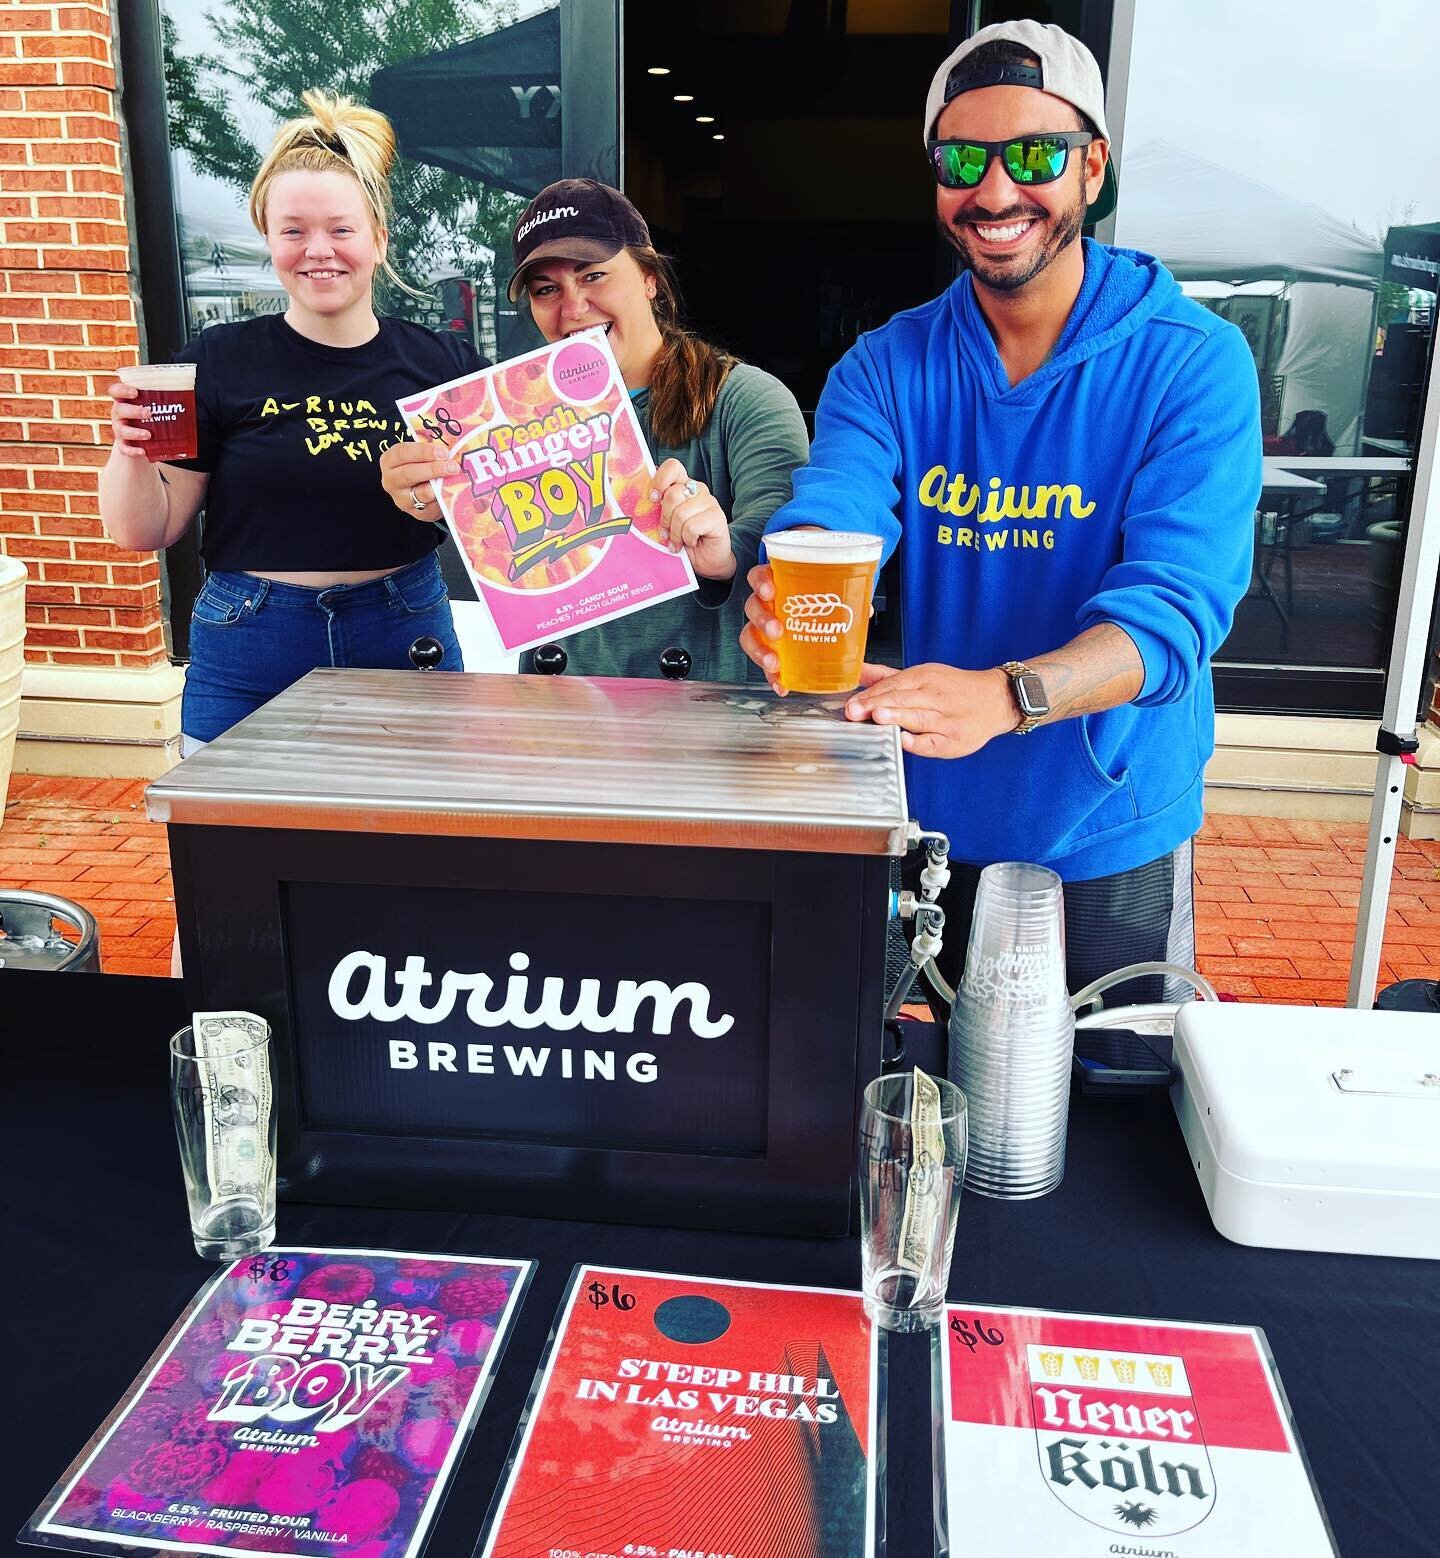 🍑 NC Exclusive Draft Special 🍭 

We&rsquo;re pouring reserve kegs of our Peach Ringer Boy sour outside the Norton Commons Taproom today and tomorrow for the NC Art Festival!

Feeling peachy? Come grab an Atrium classic, follow it up with a fruited 